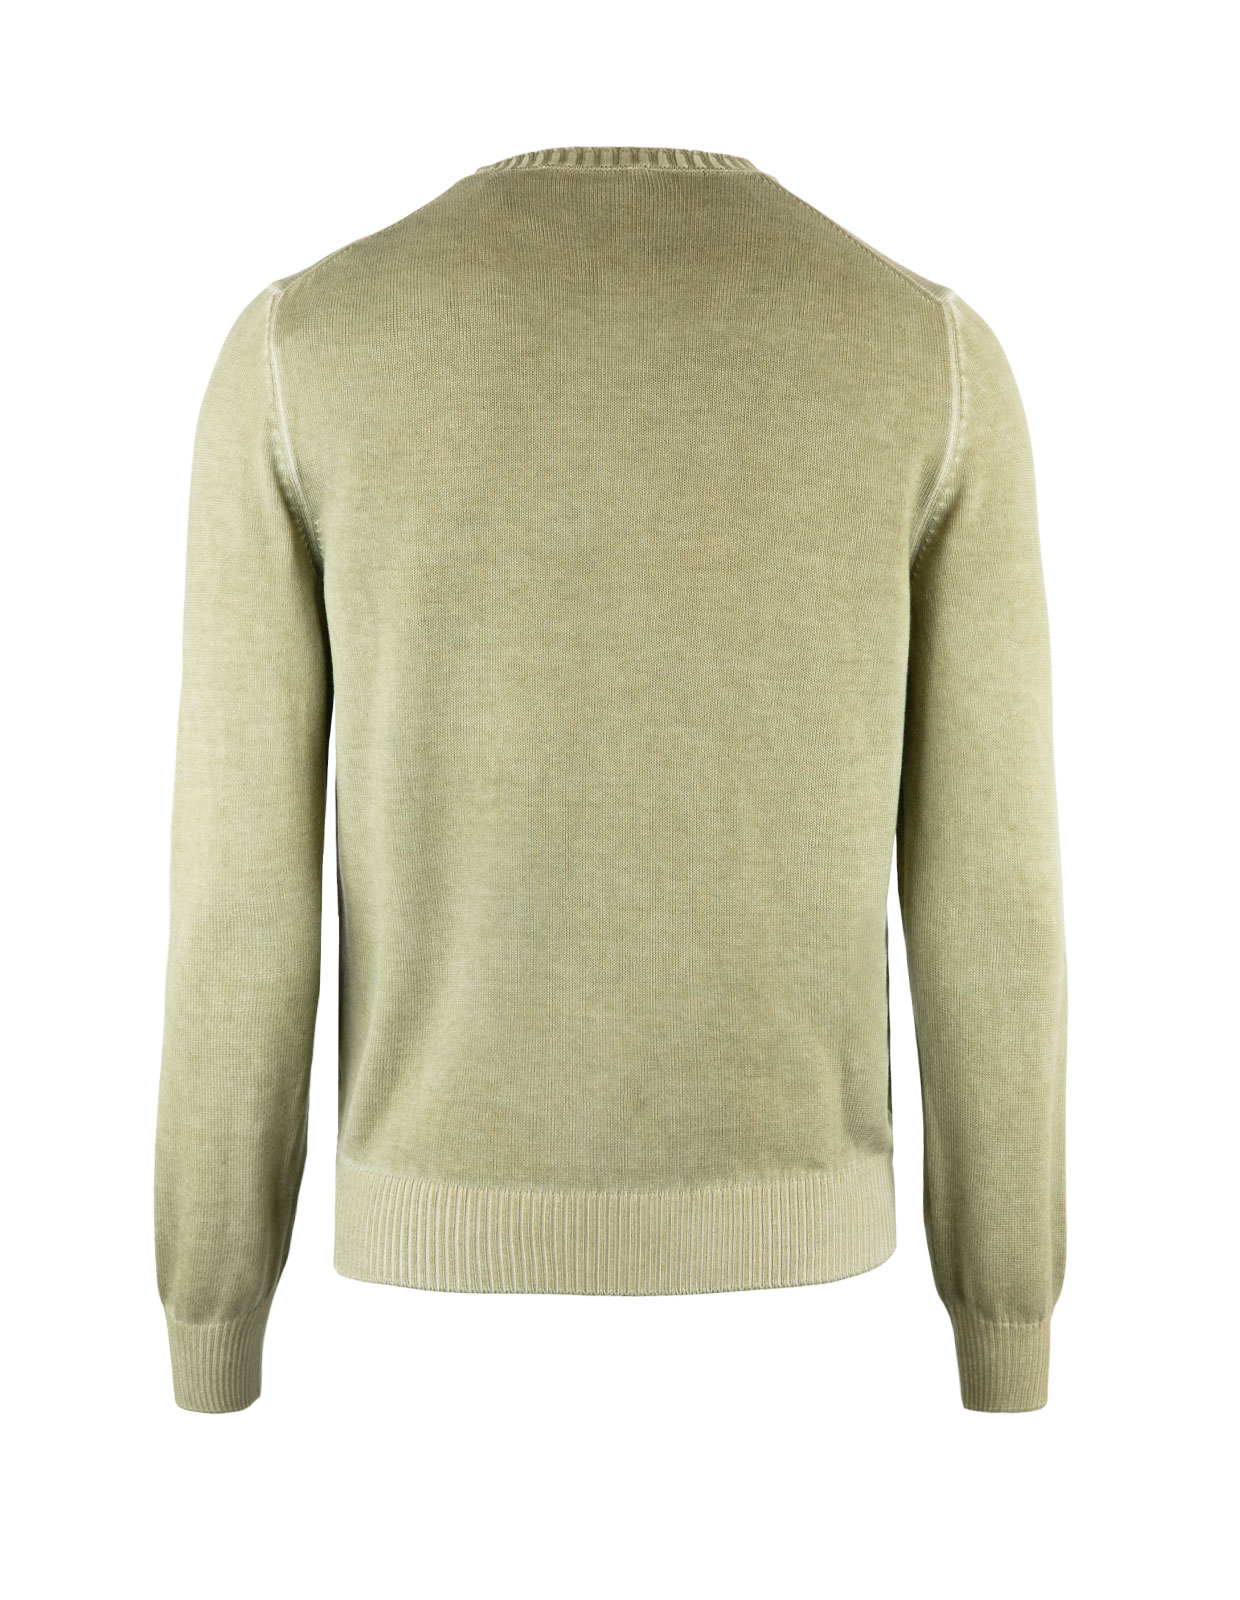 Crew Neck Sweater Knitted Cotton Olive